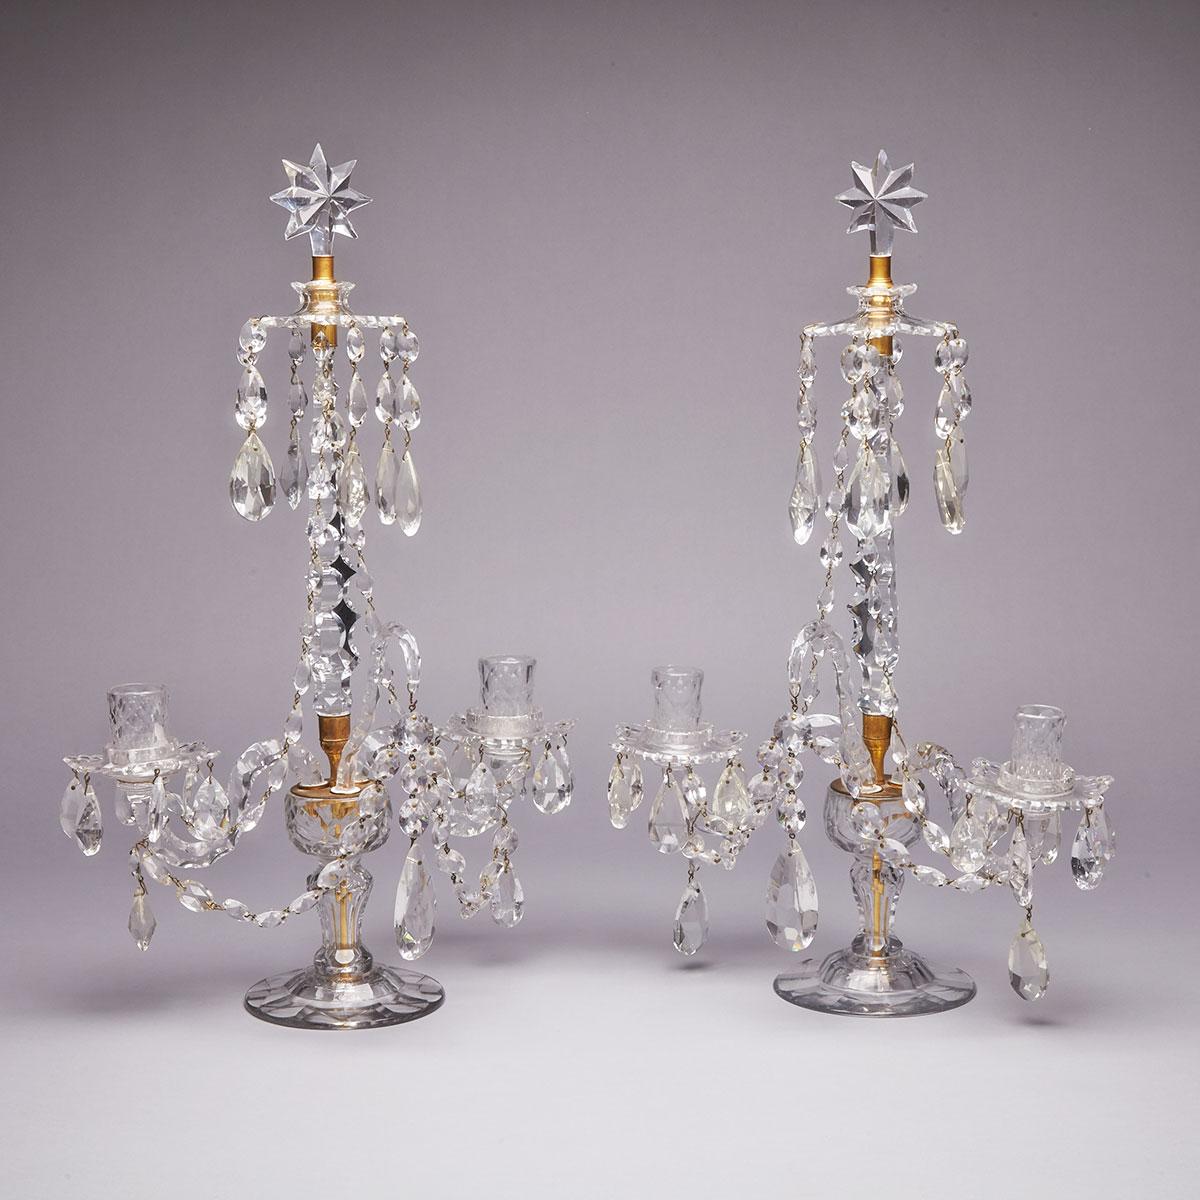 Pair of Anglo-Irish Cut Glass Two-Light Candelabra, late 18th/early 19th century